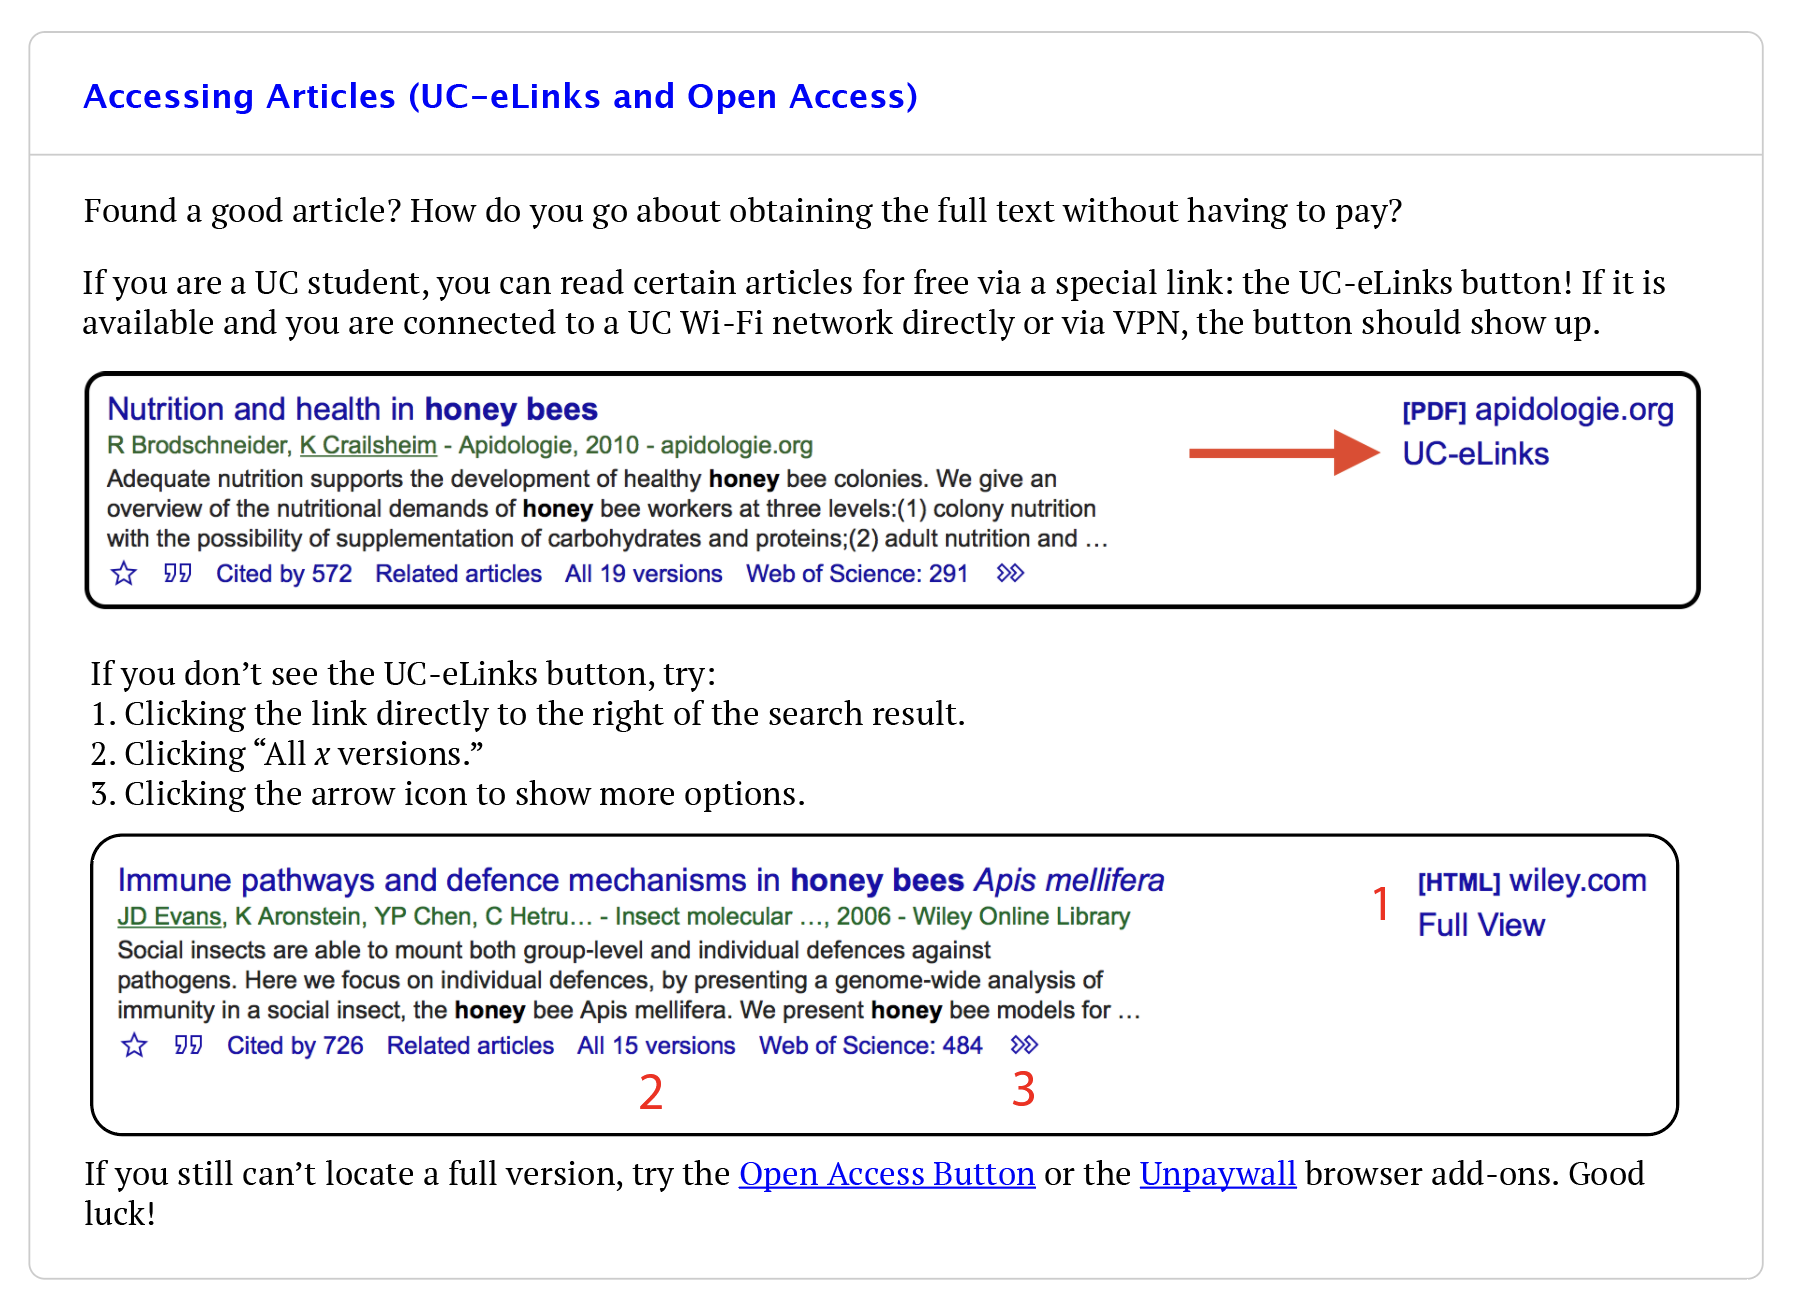 An additional prototype for the Accessing Articles tip.